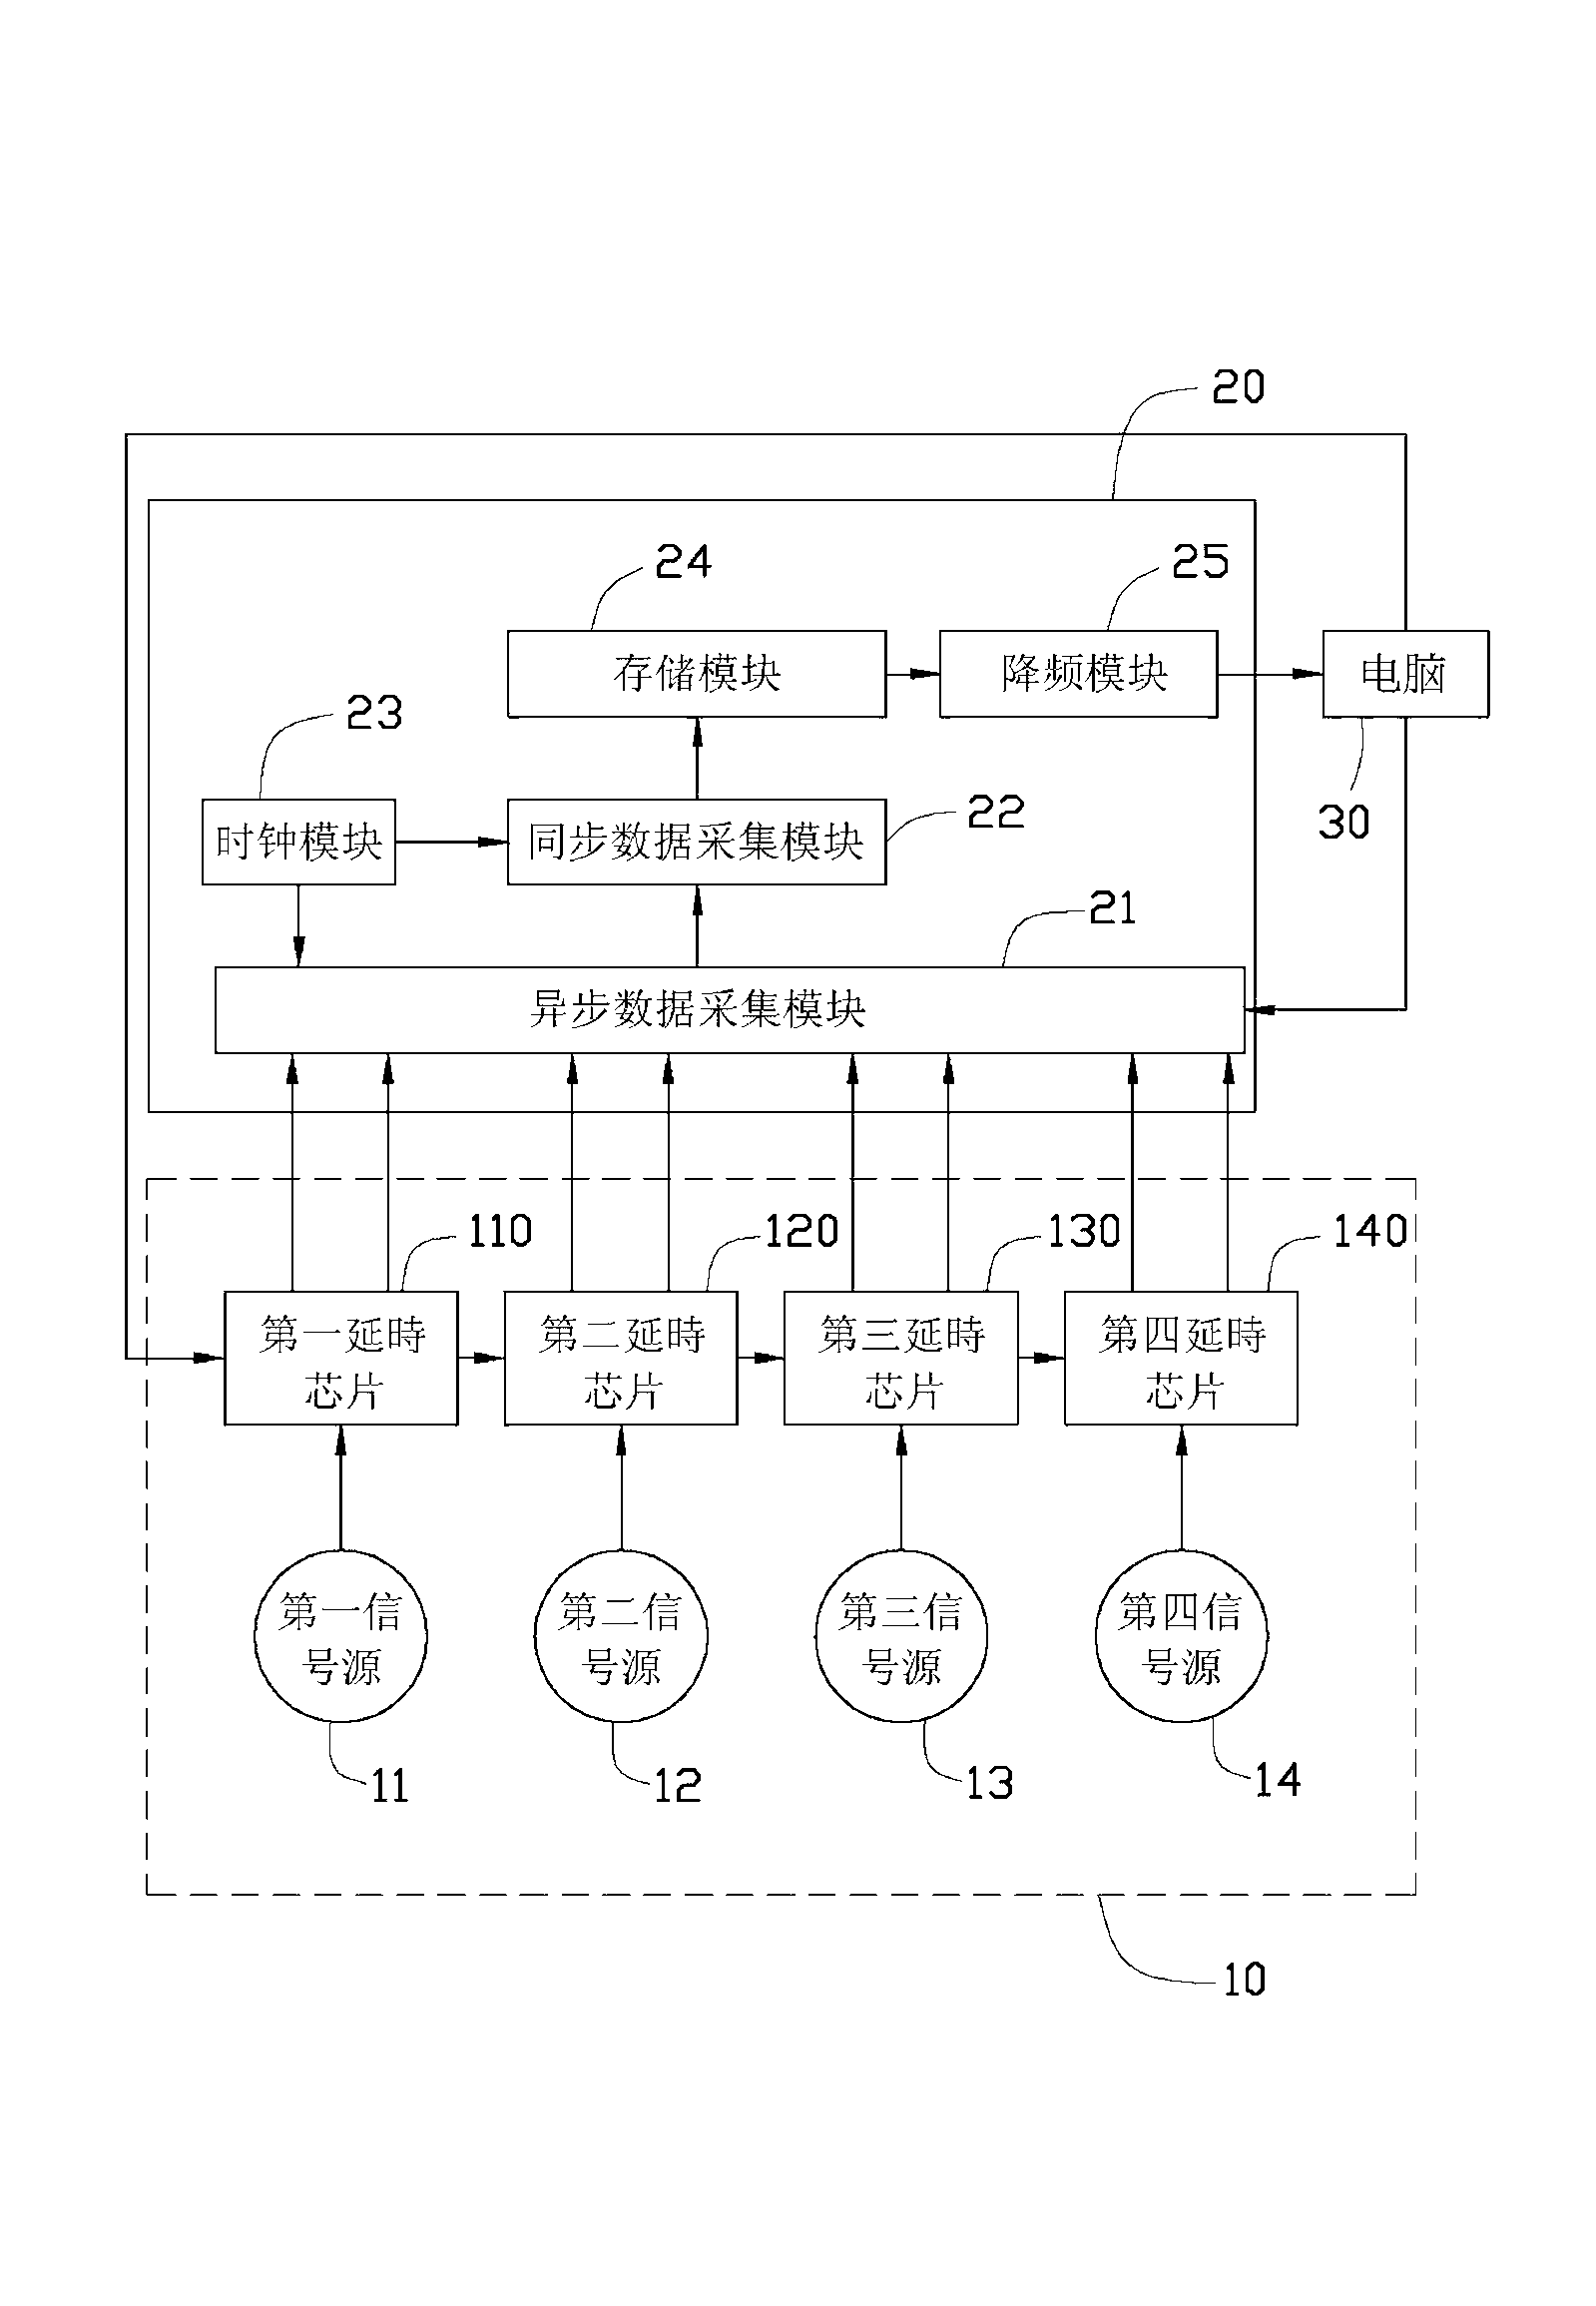 Signal collection system and method